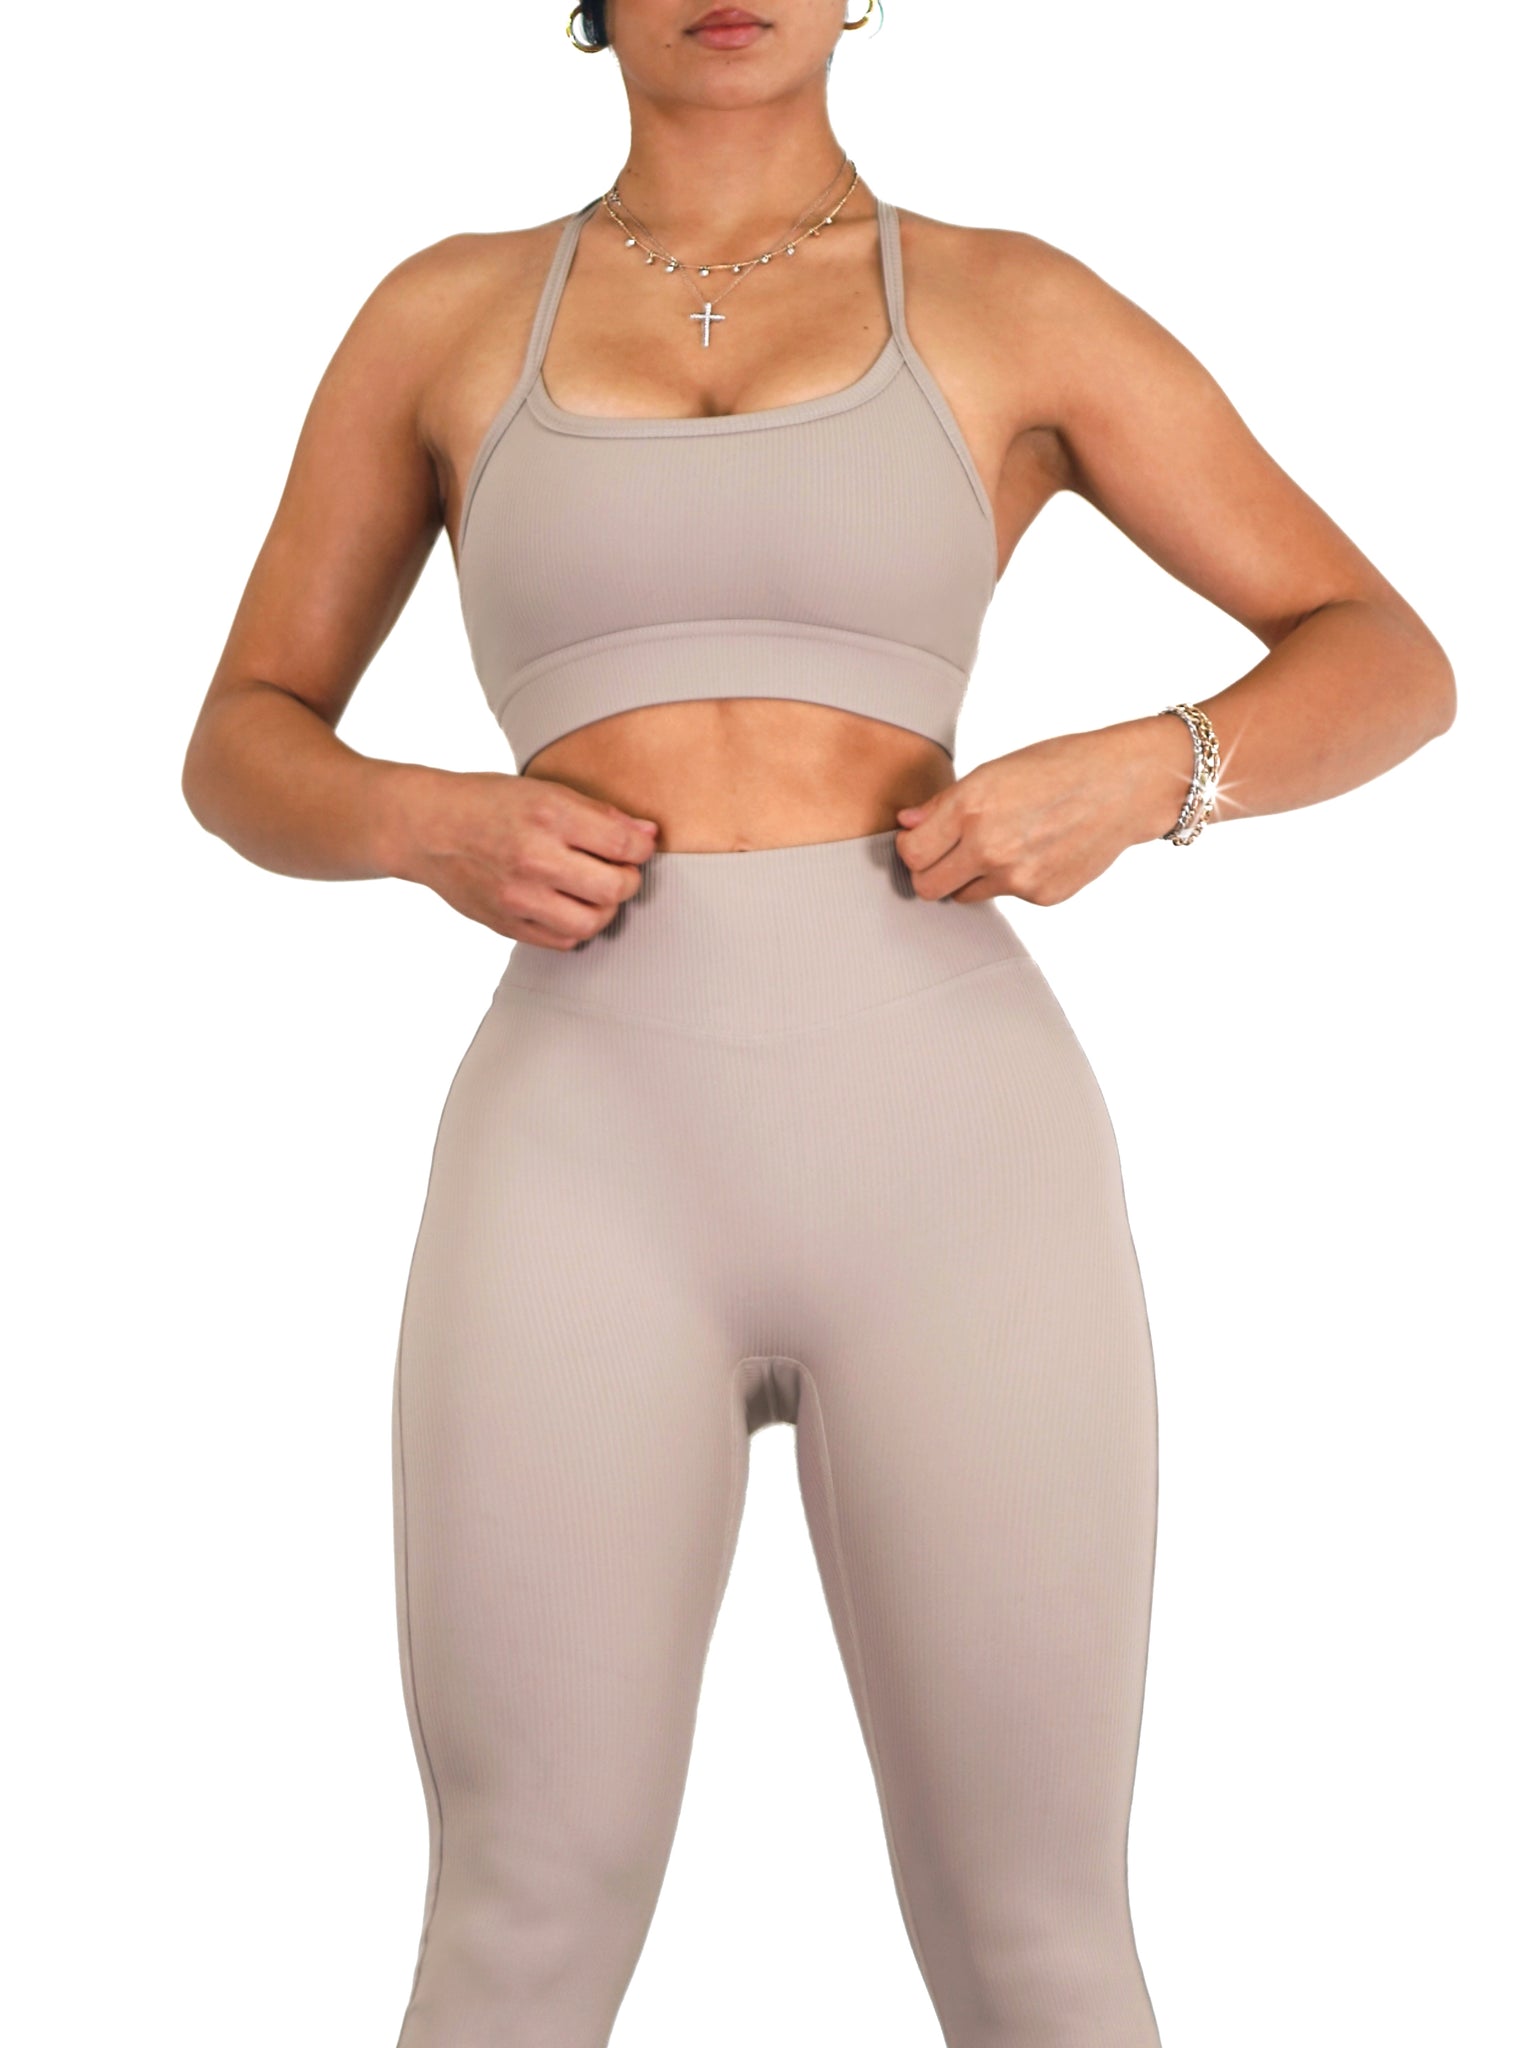 Ribbed Athletic Sports Bra (Pearl Taupé) – Fitness Fashioness